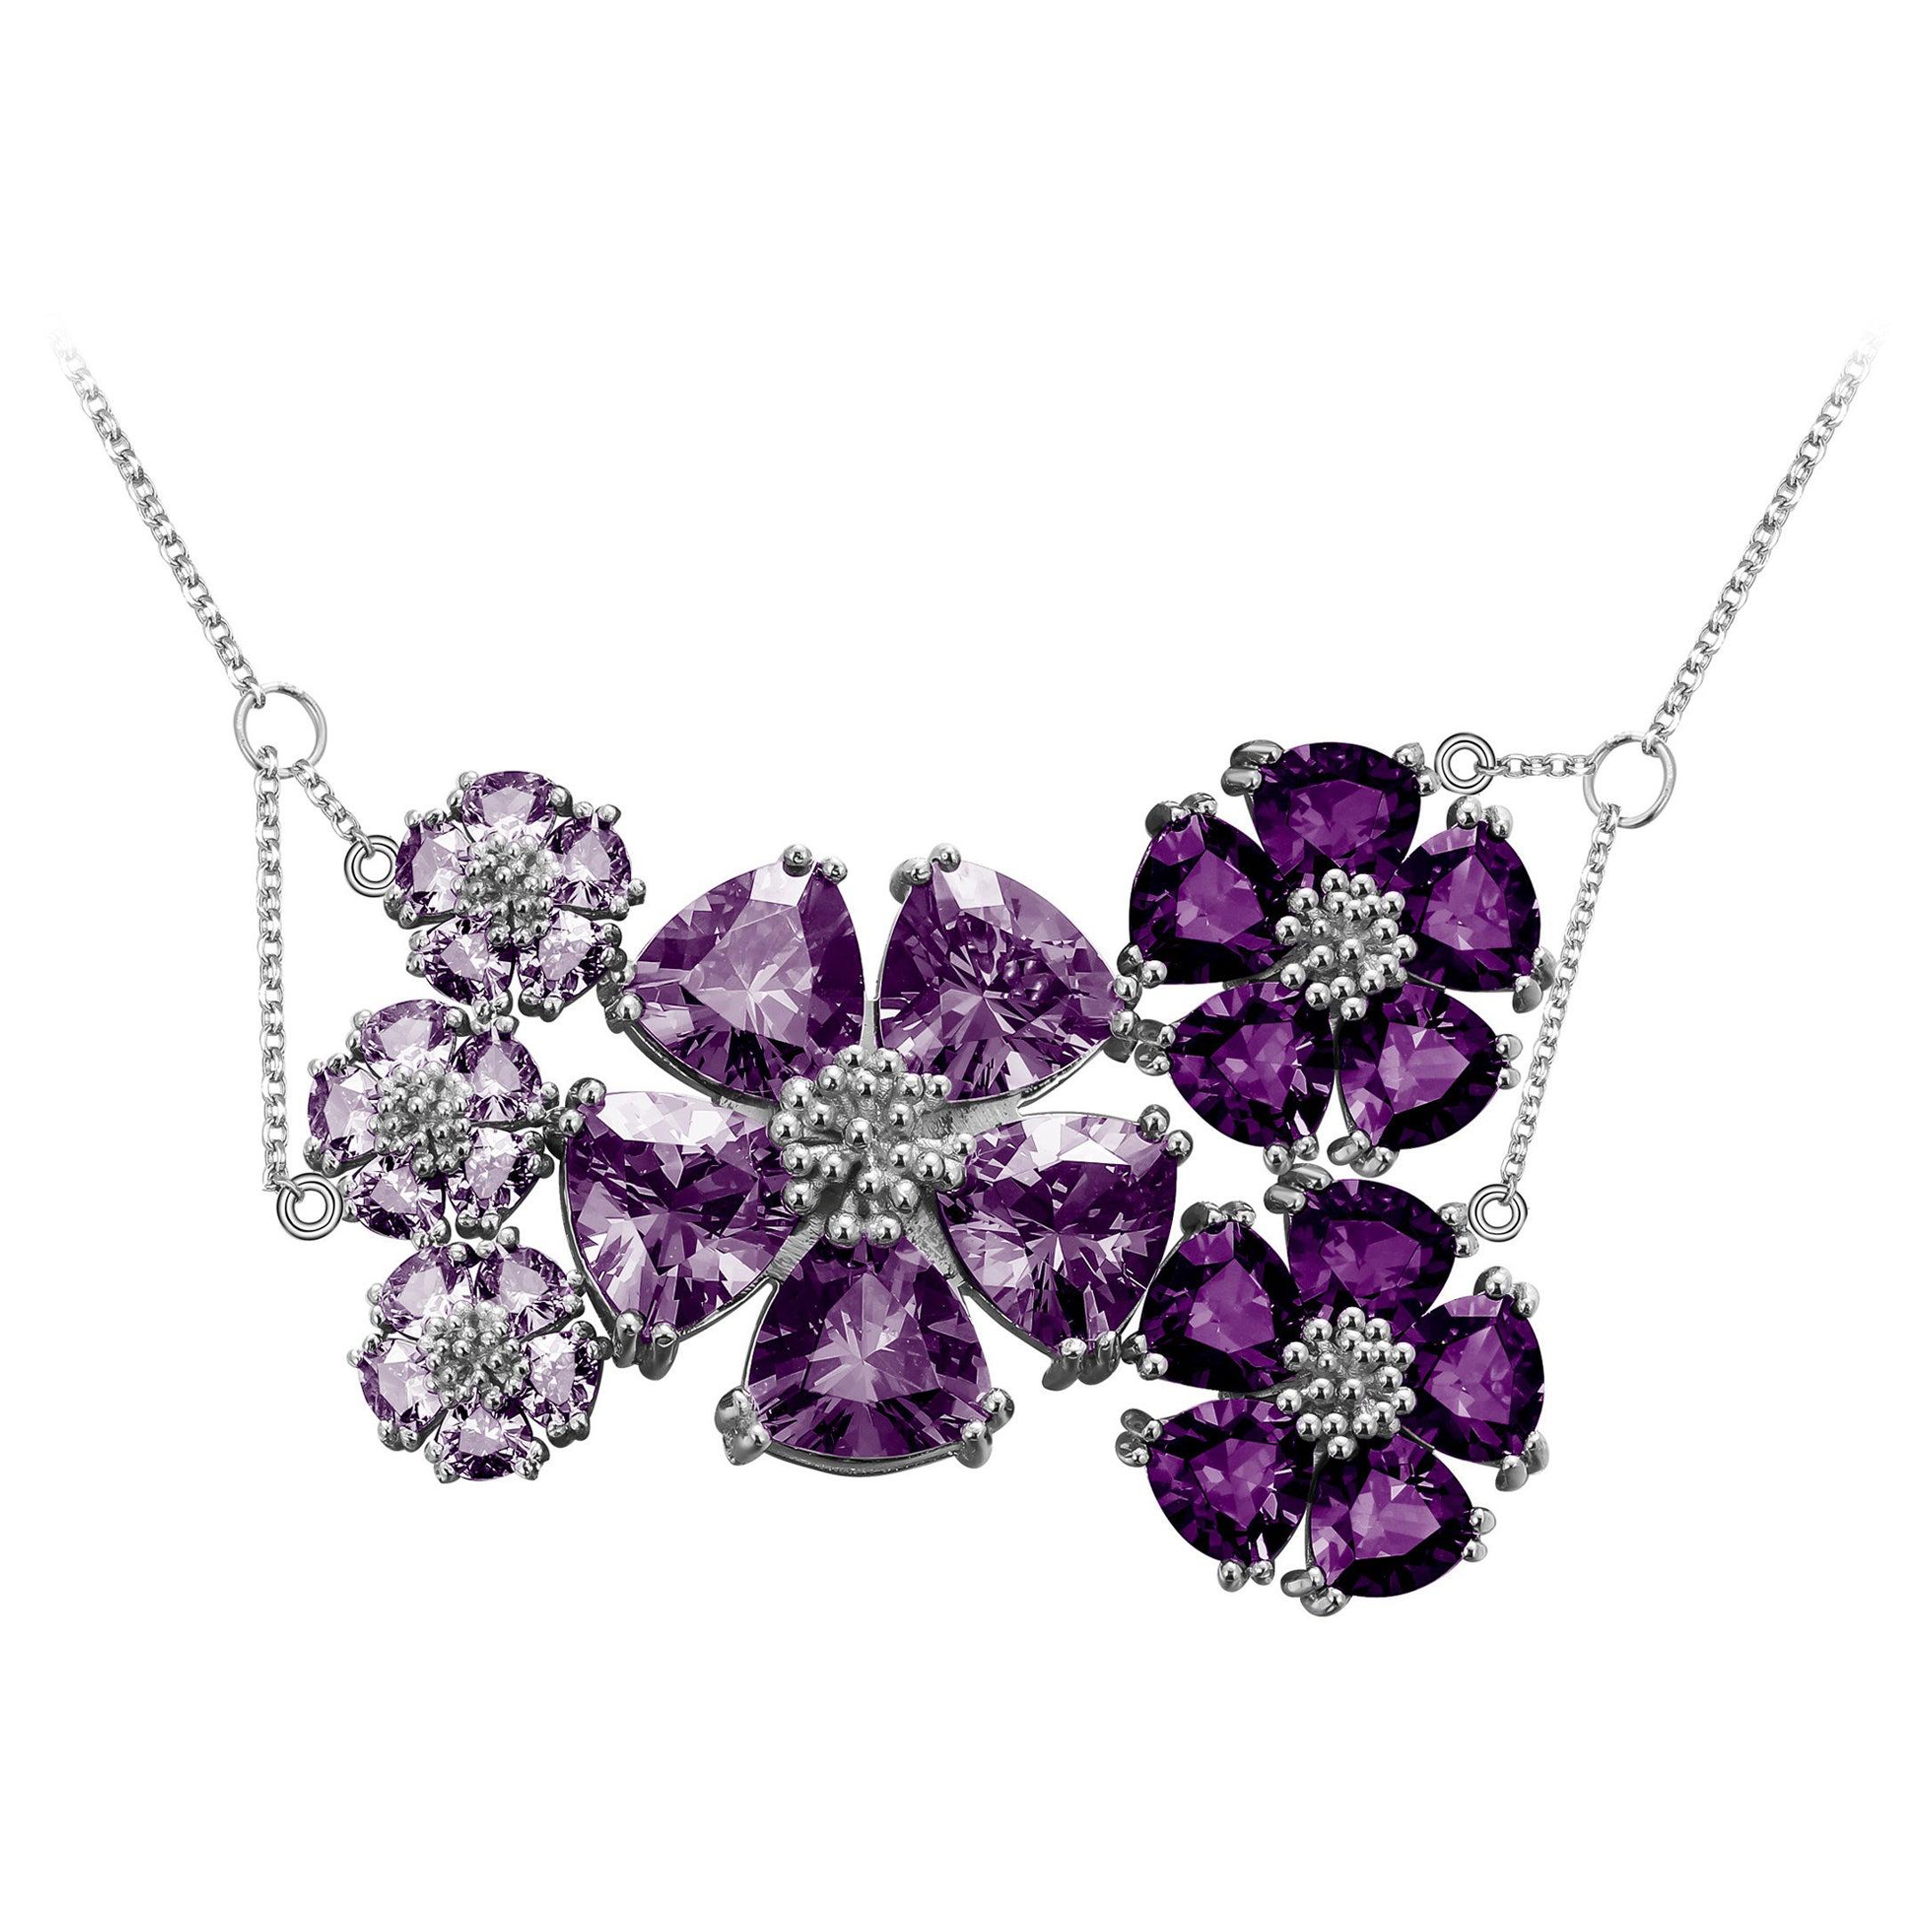 Mixed Lavender and Purple Amethyst Blossom Renaissance Necklace For Sale